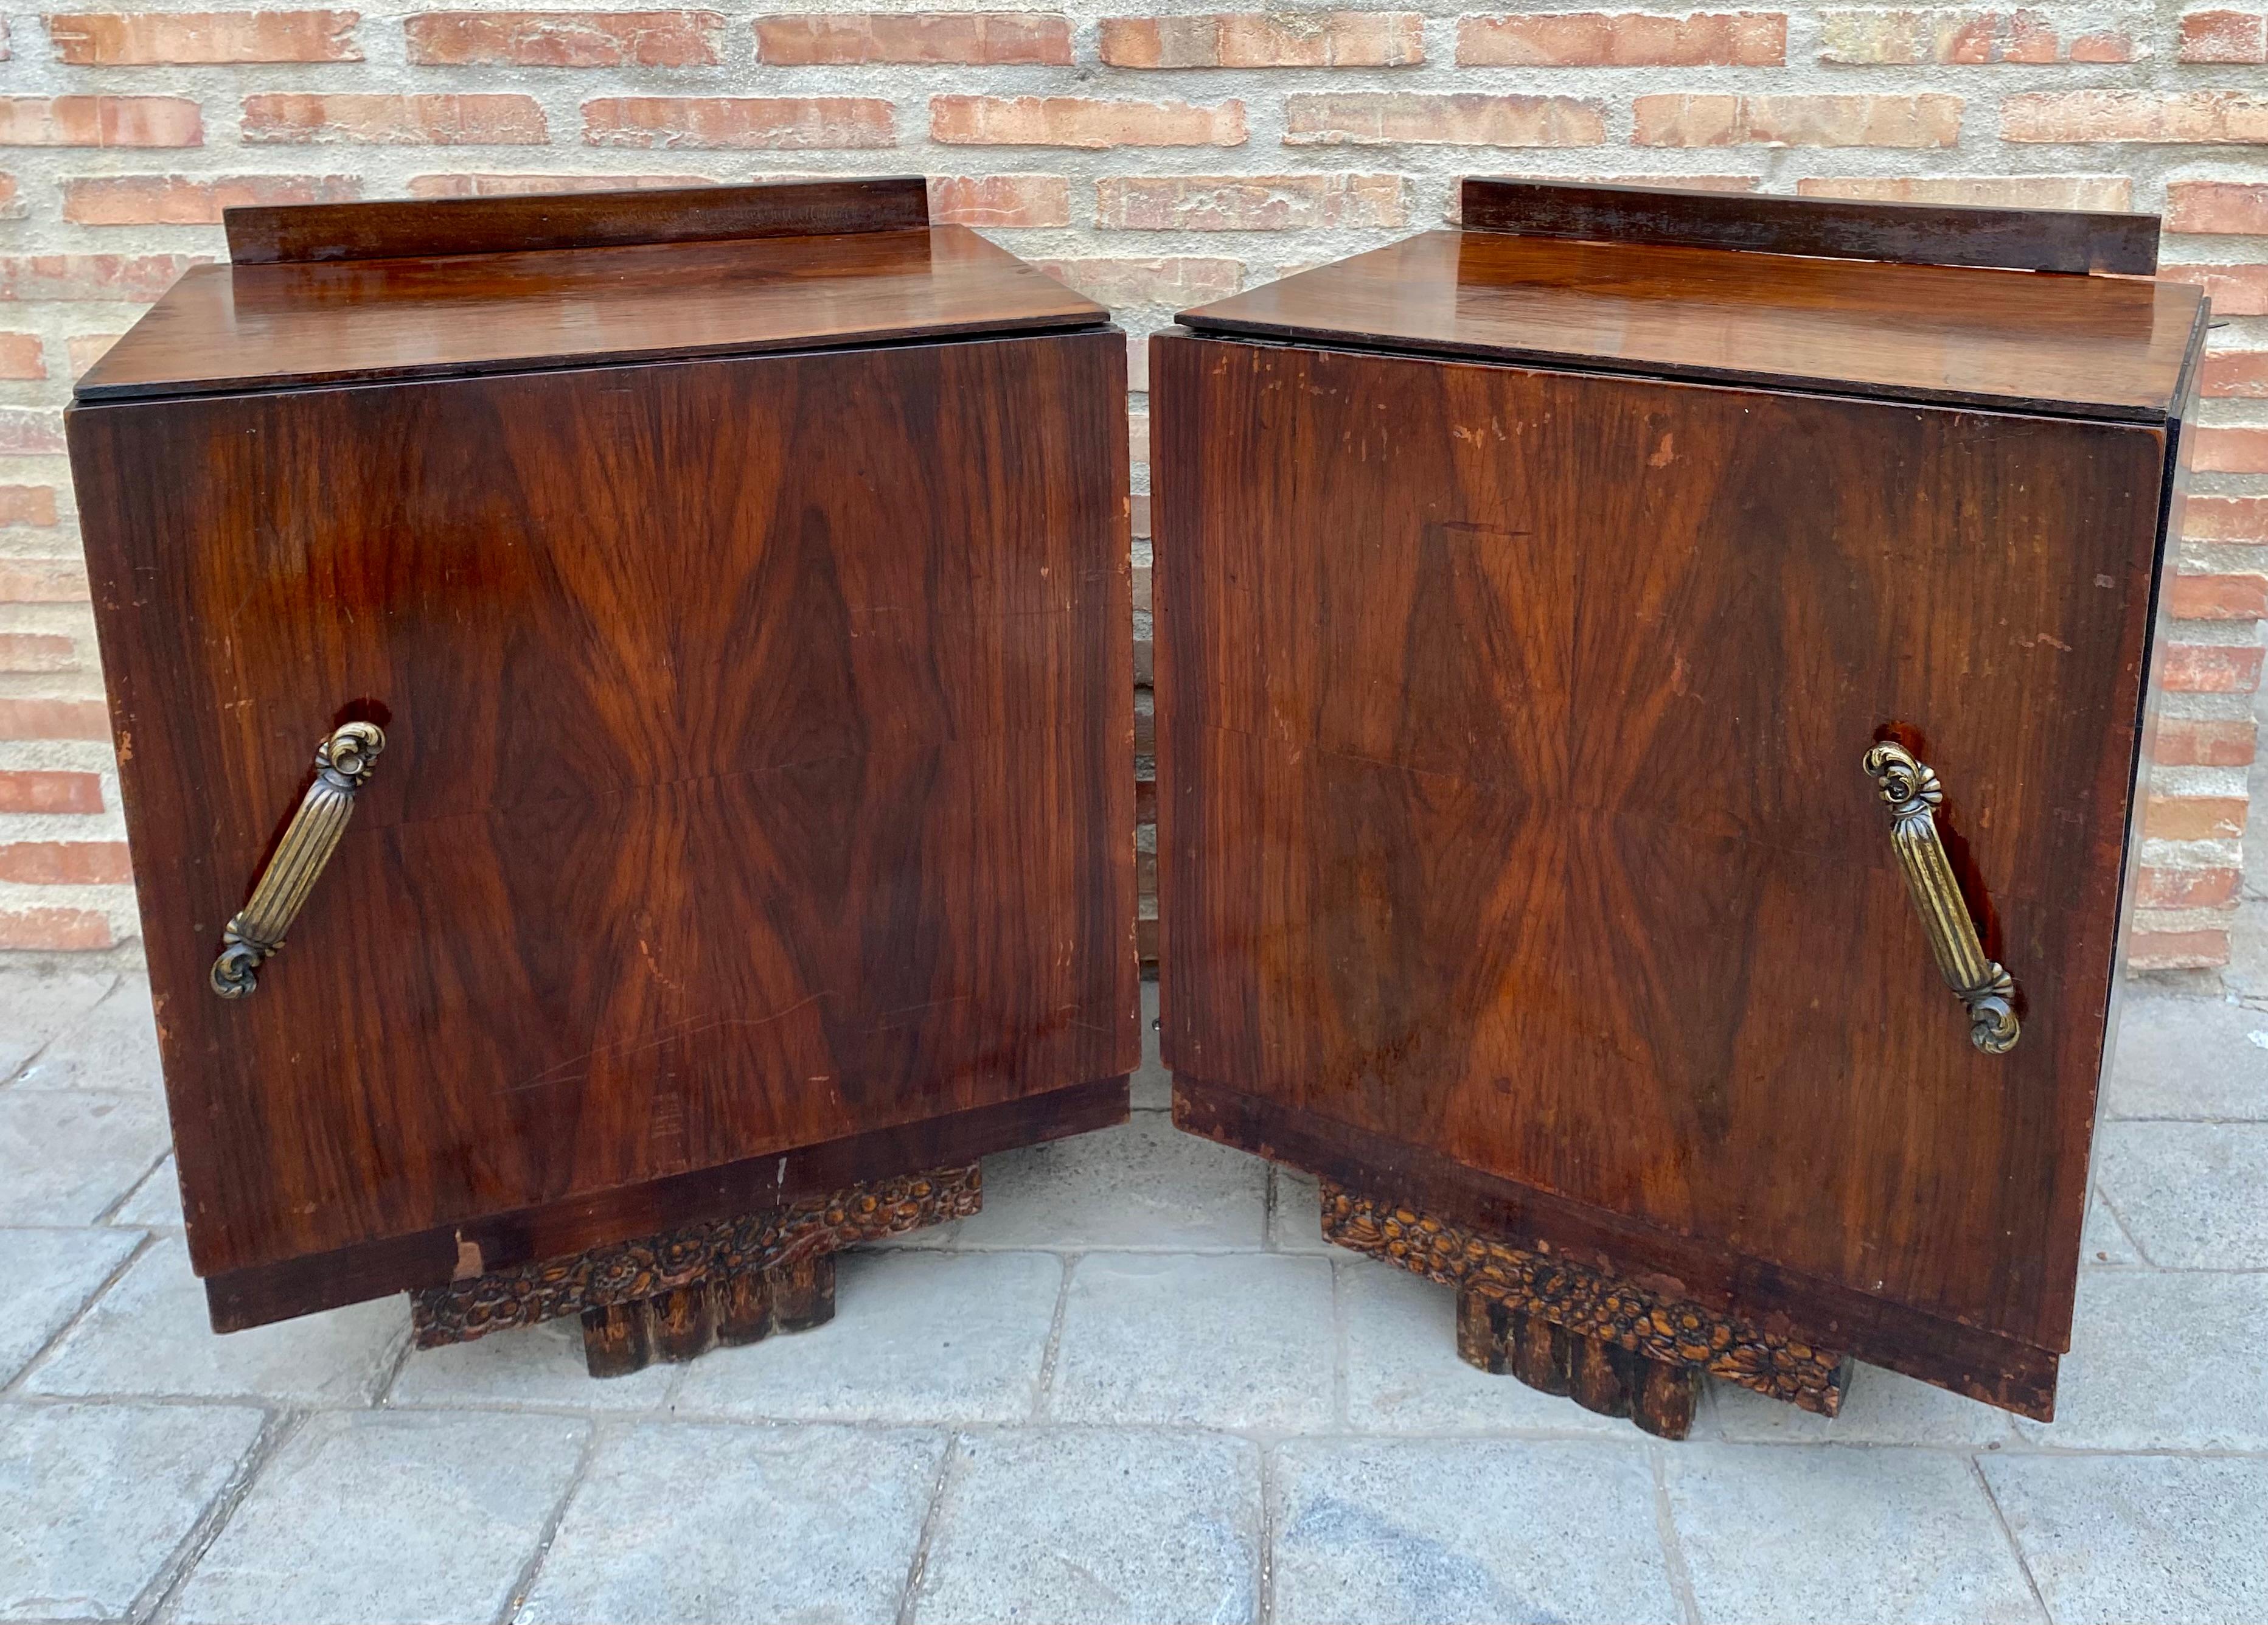 Beautiful pair of French Art Deco bedside tables from around the 1930s made of walnut root wood, to be used as bedside tables in our bedrooms. Each of them has a storage compartment with a hinged door and a beautiful bronze handle, inside it has an